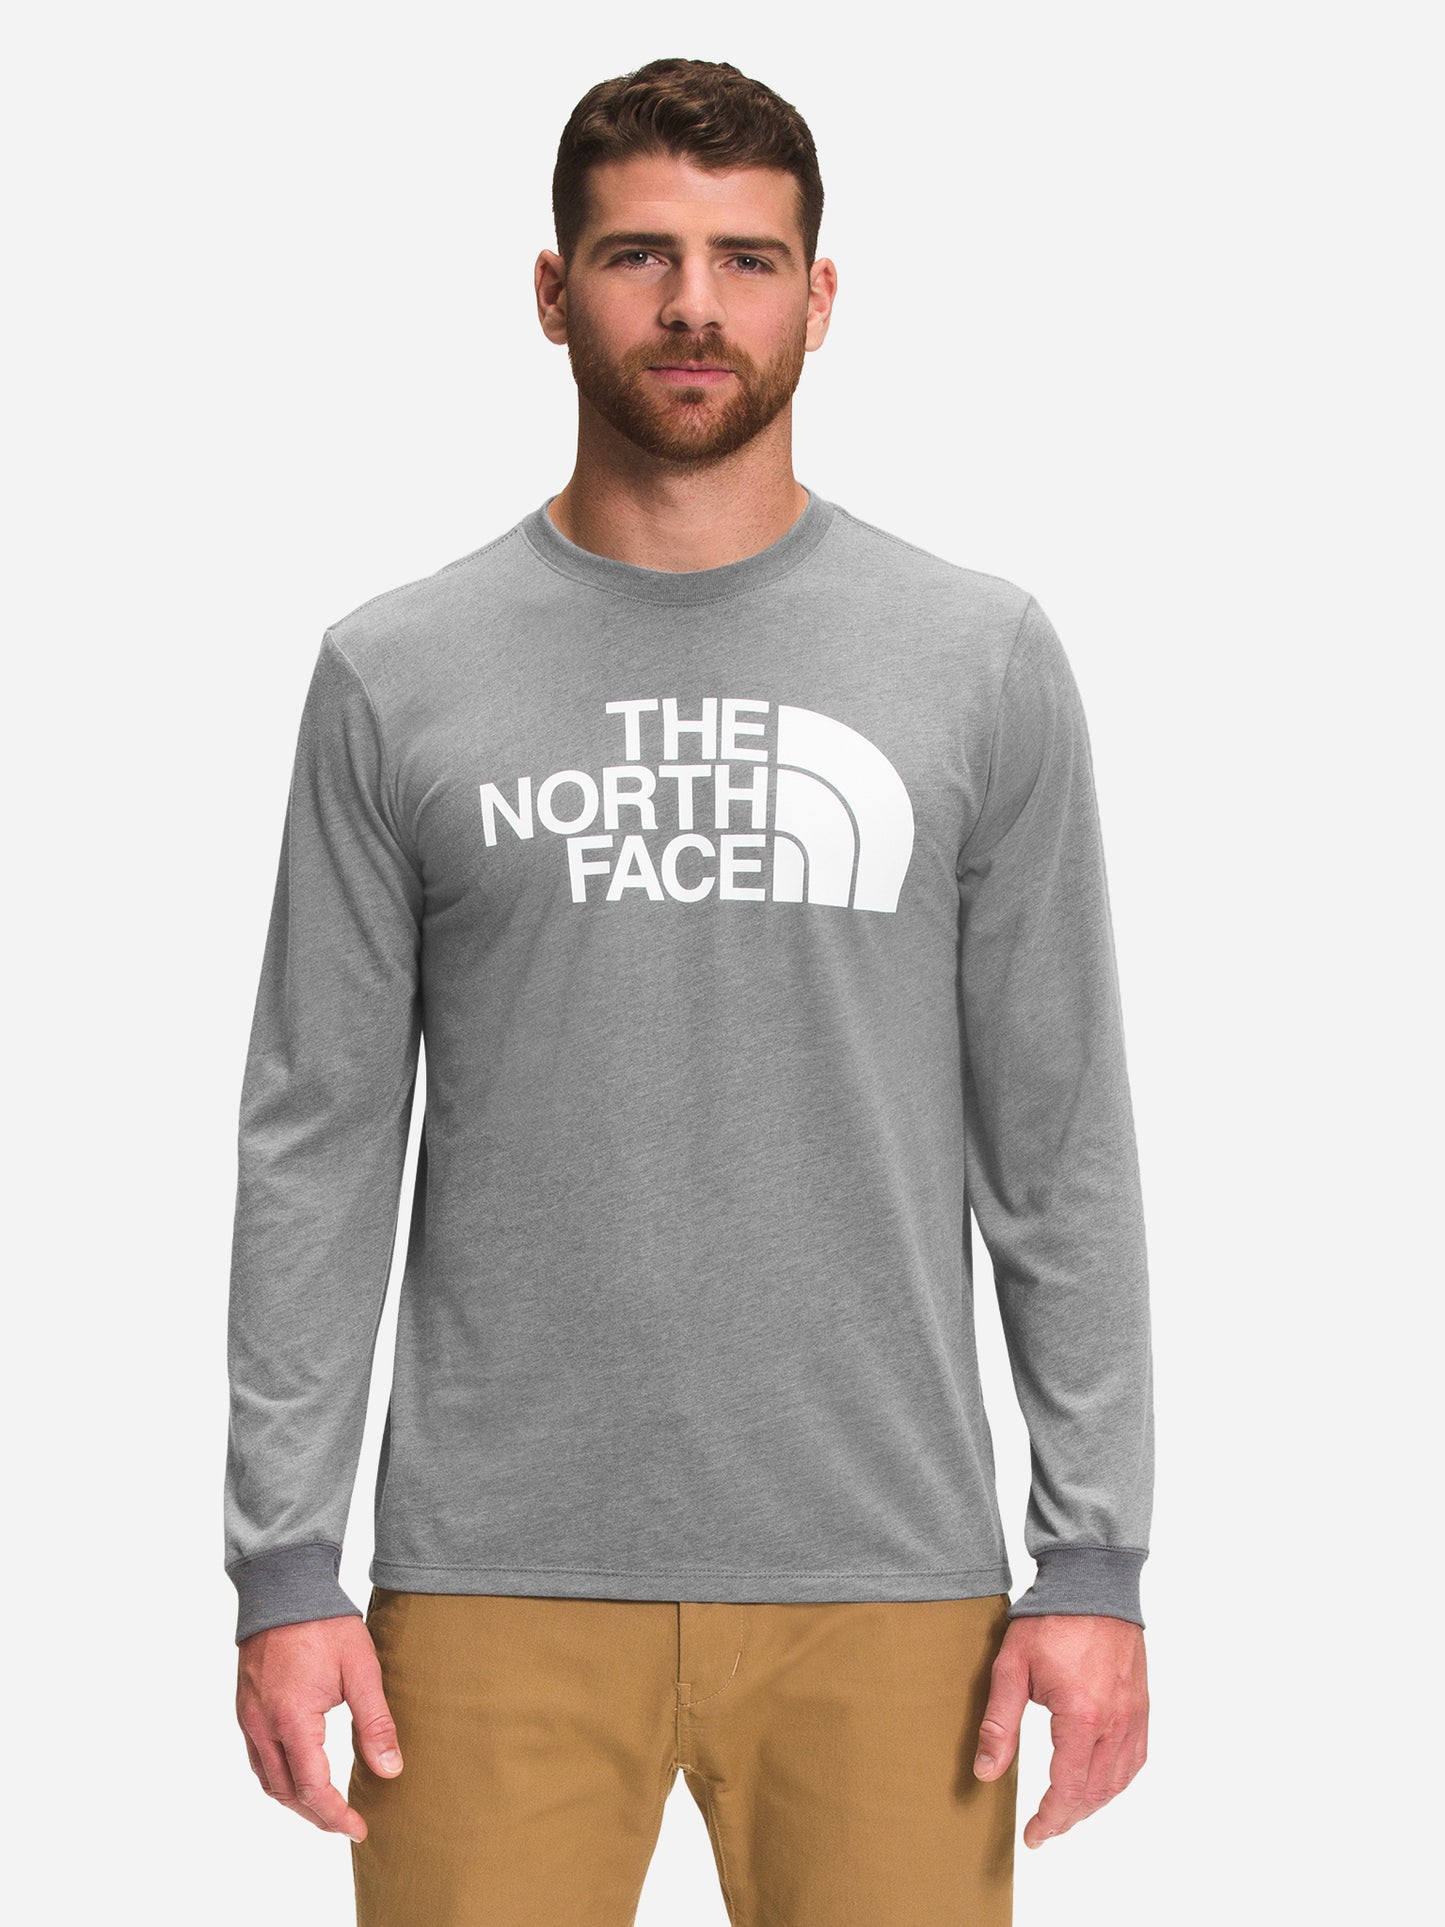 The North Face Men’s Long-Sleeve Half Dome Tee